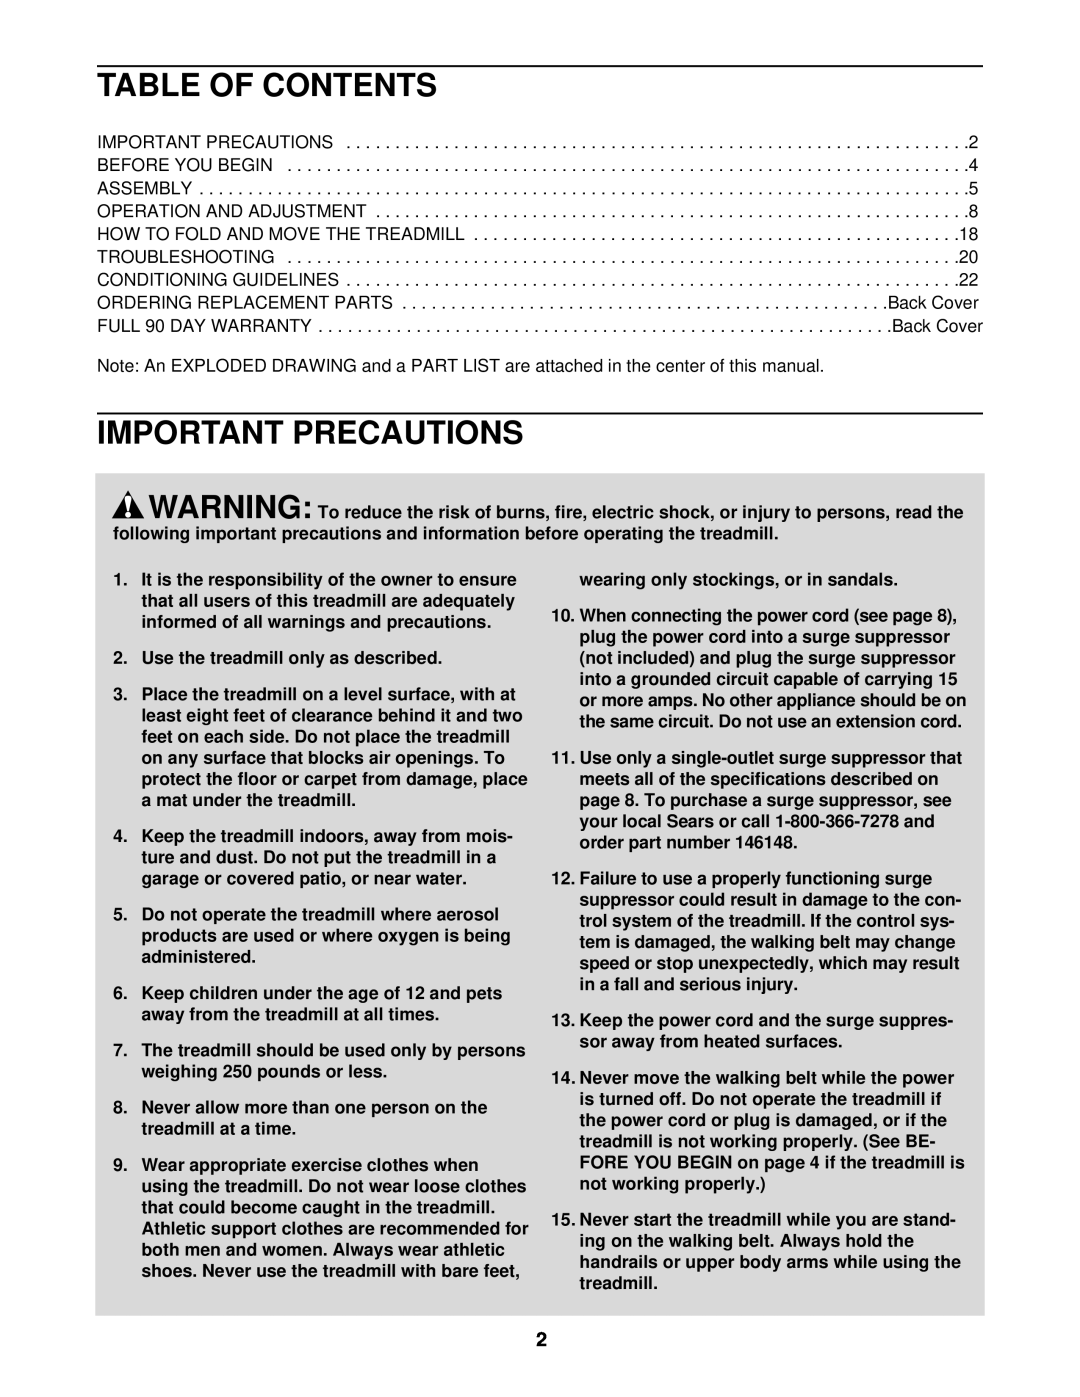 ProForm 831.293040 user manual Table Of Contents, Important Precautions, Use the treadmill only as described 